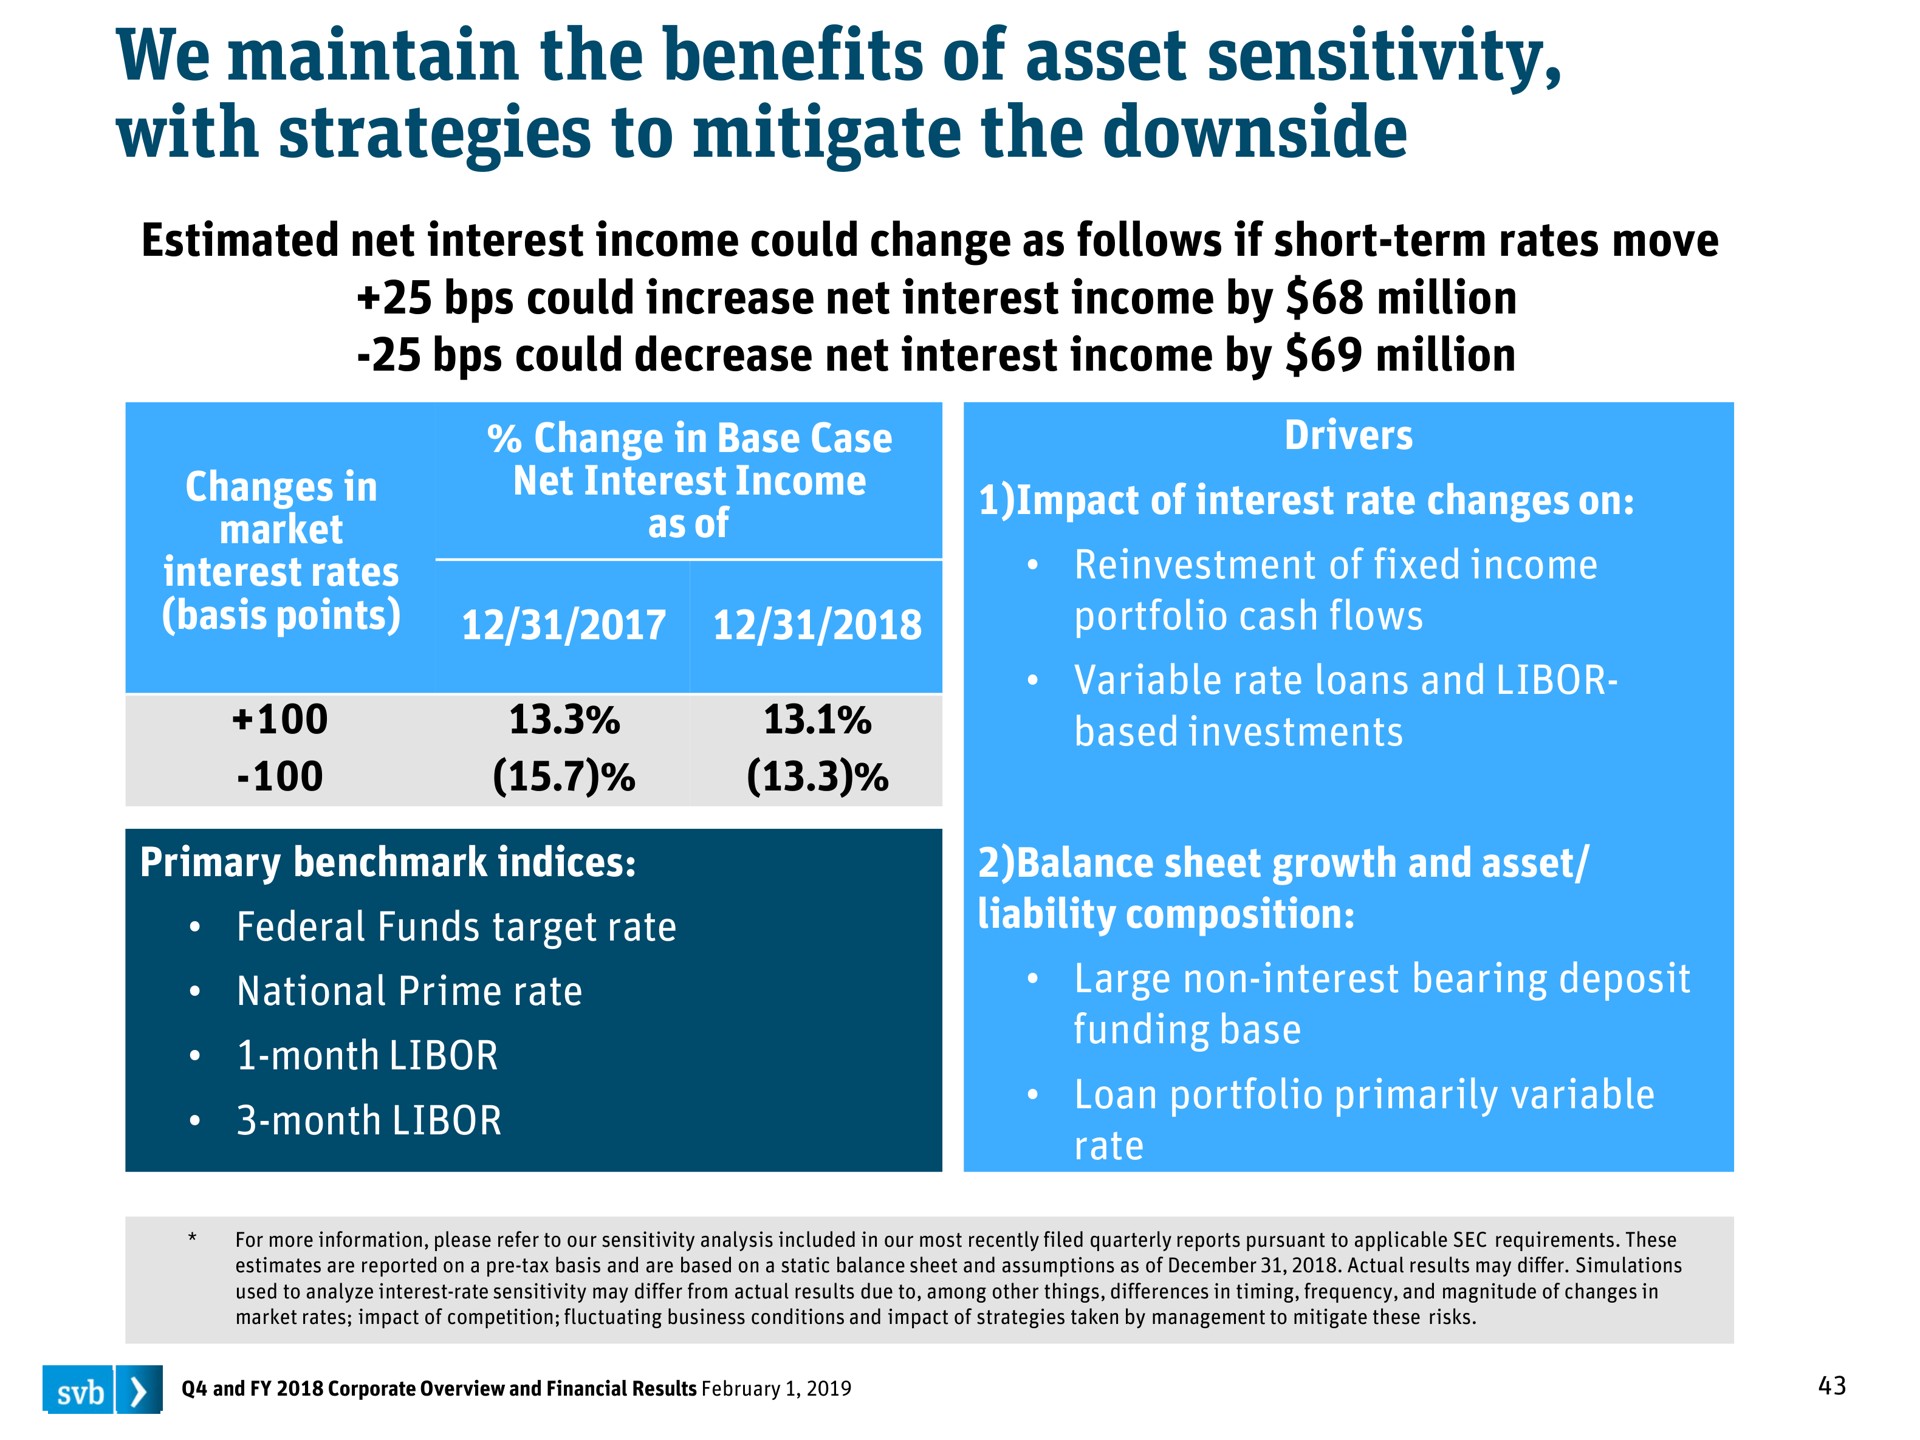 we maintain the benefits of asset sensitivity with strategies to mitigate the downside | Silicon Valley Bank